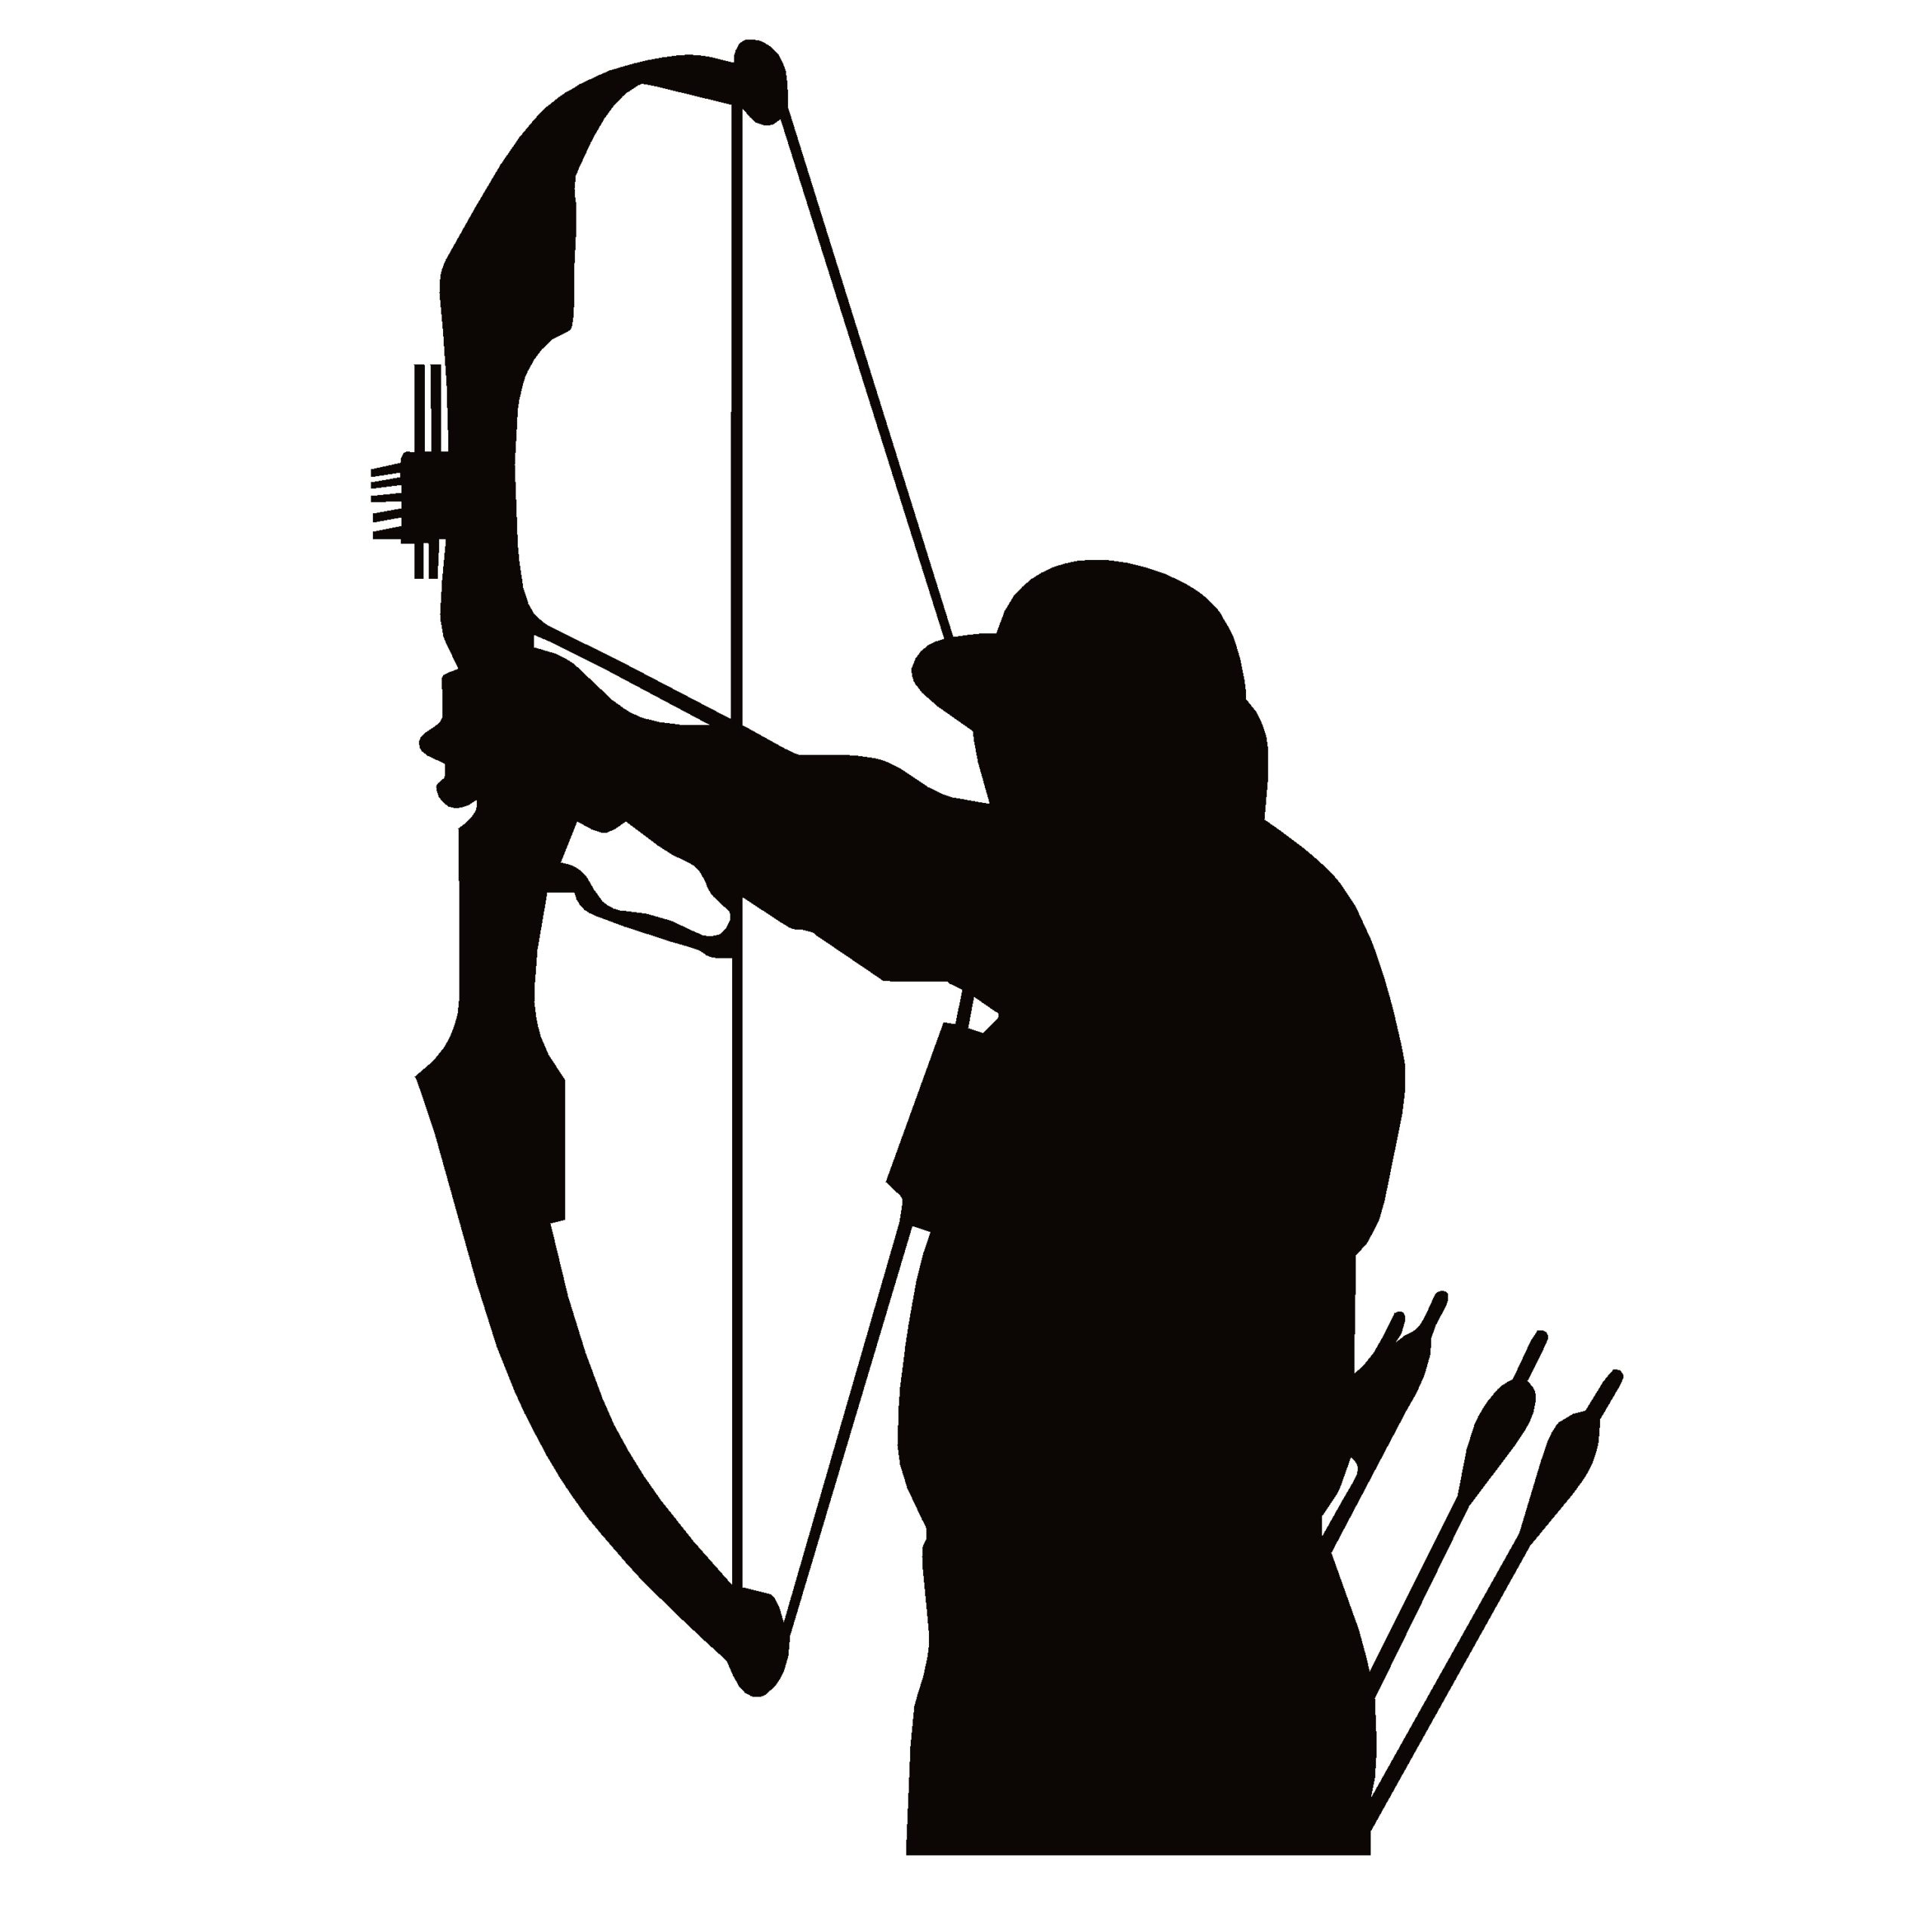 Bow Hunter Decal,deer hunting sticker,archery,compound bow,deer hunter 